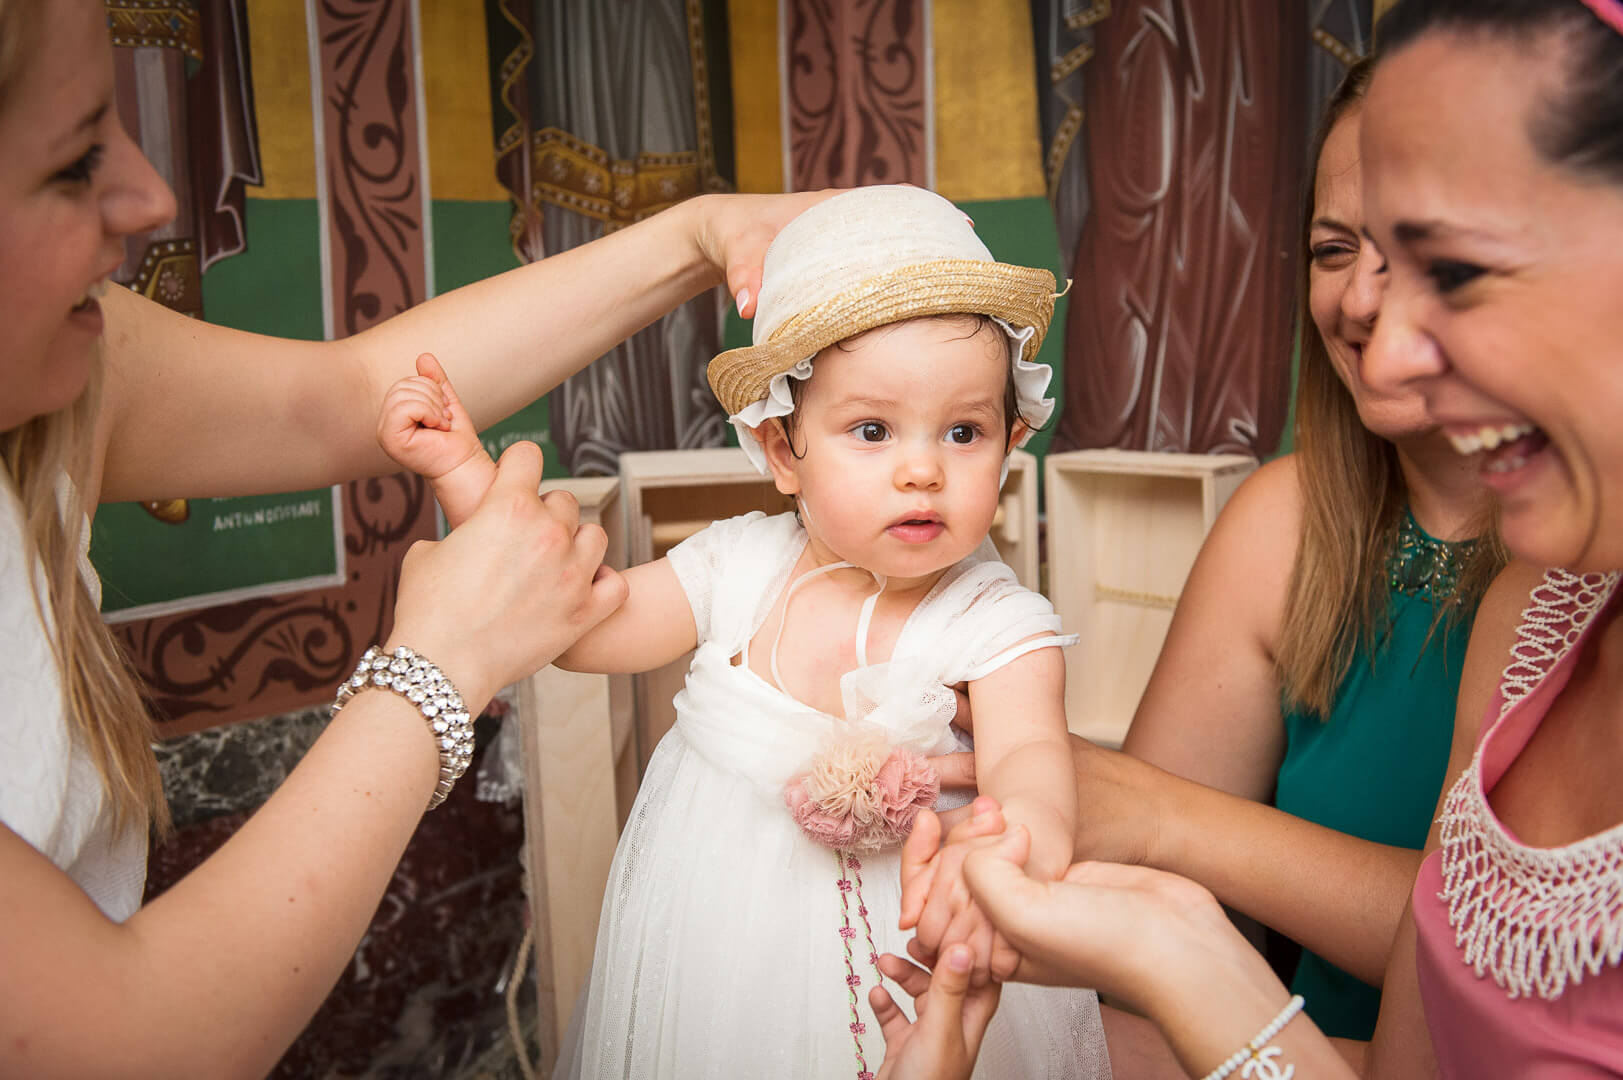 Christening joy continues: gentle touches as baby gets dressed for new adventures.